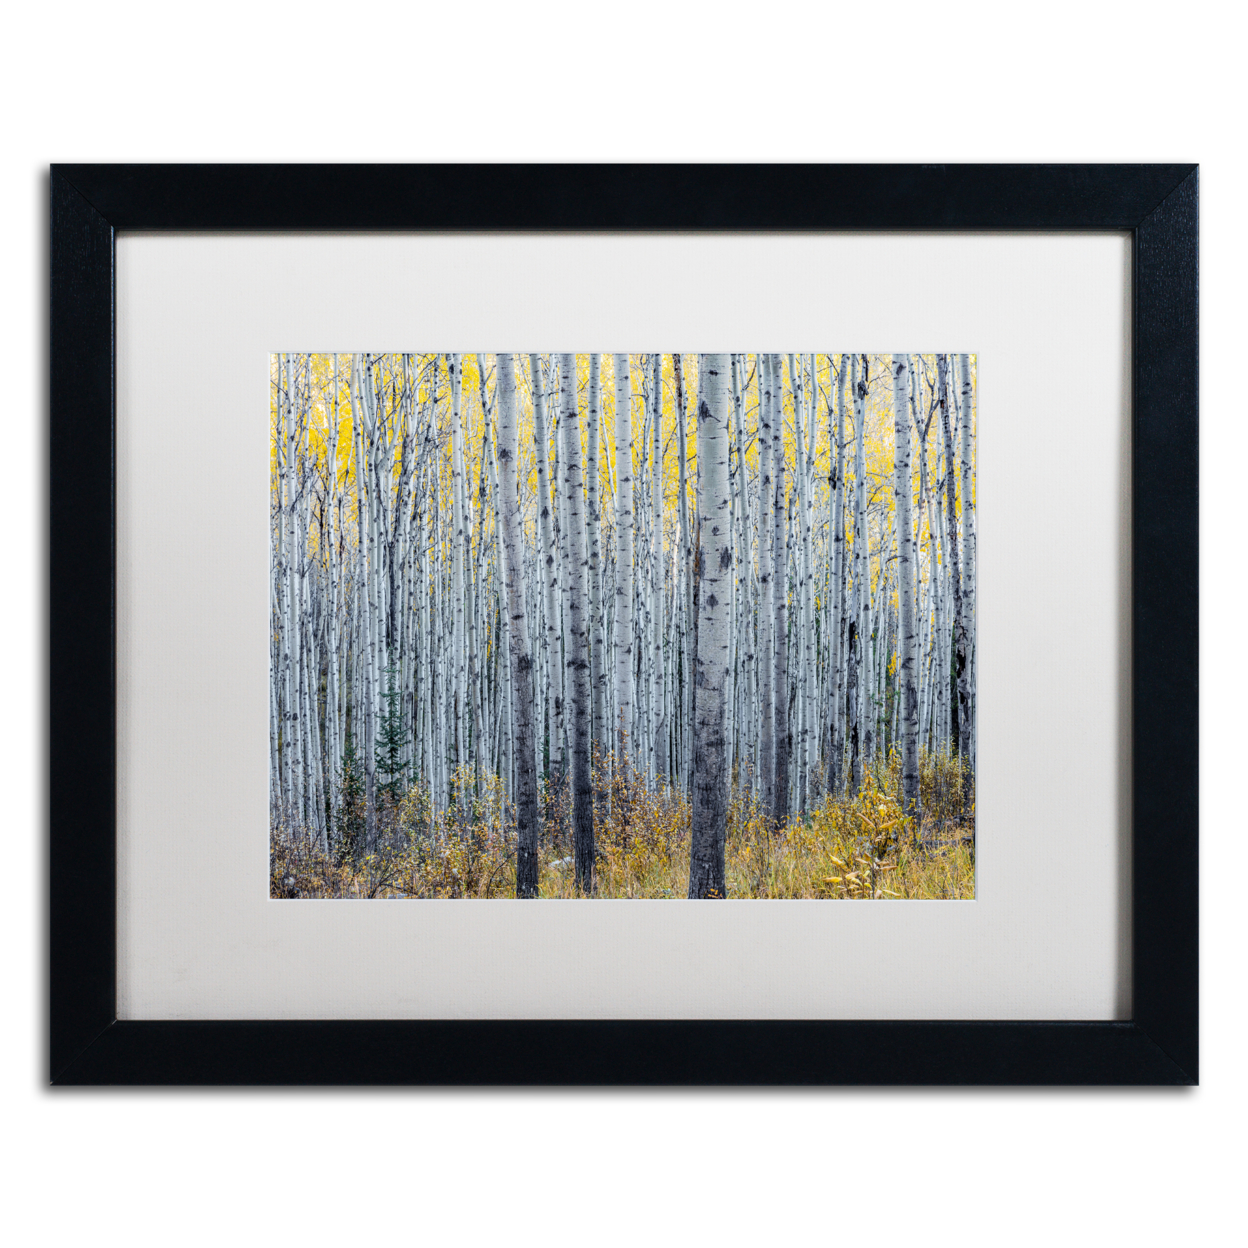 Pierre Leclerc 'Forest Of Aspen Trees' Black Wooden Framed Art 18 X 22 Inches